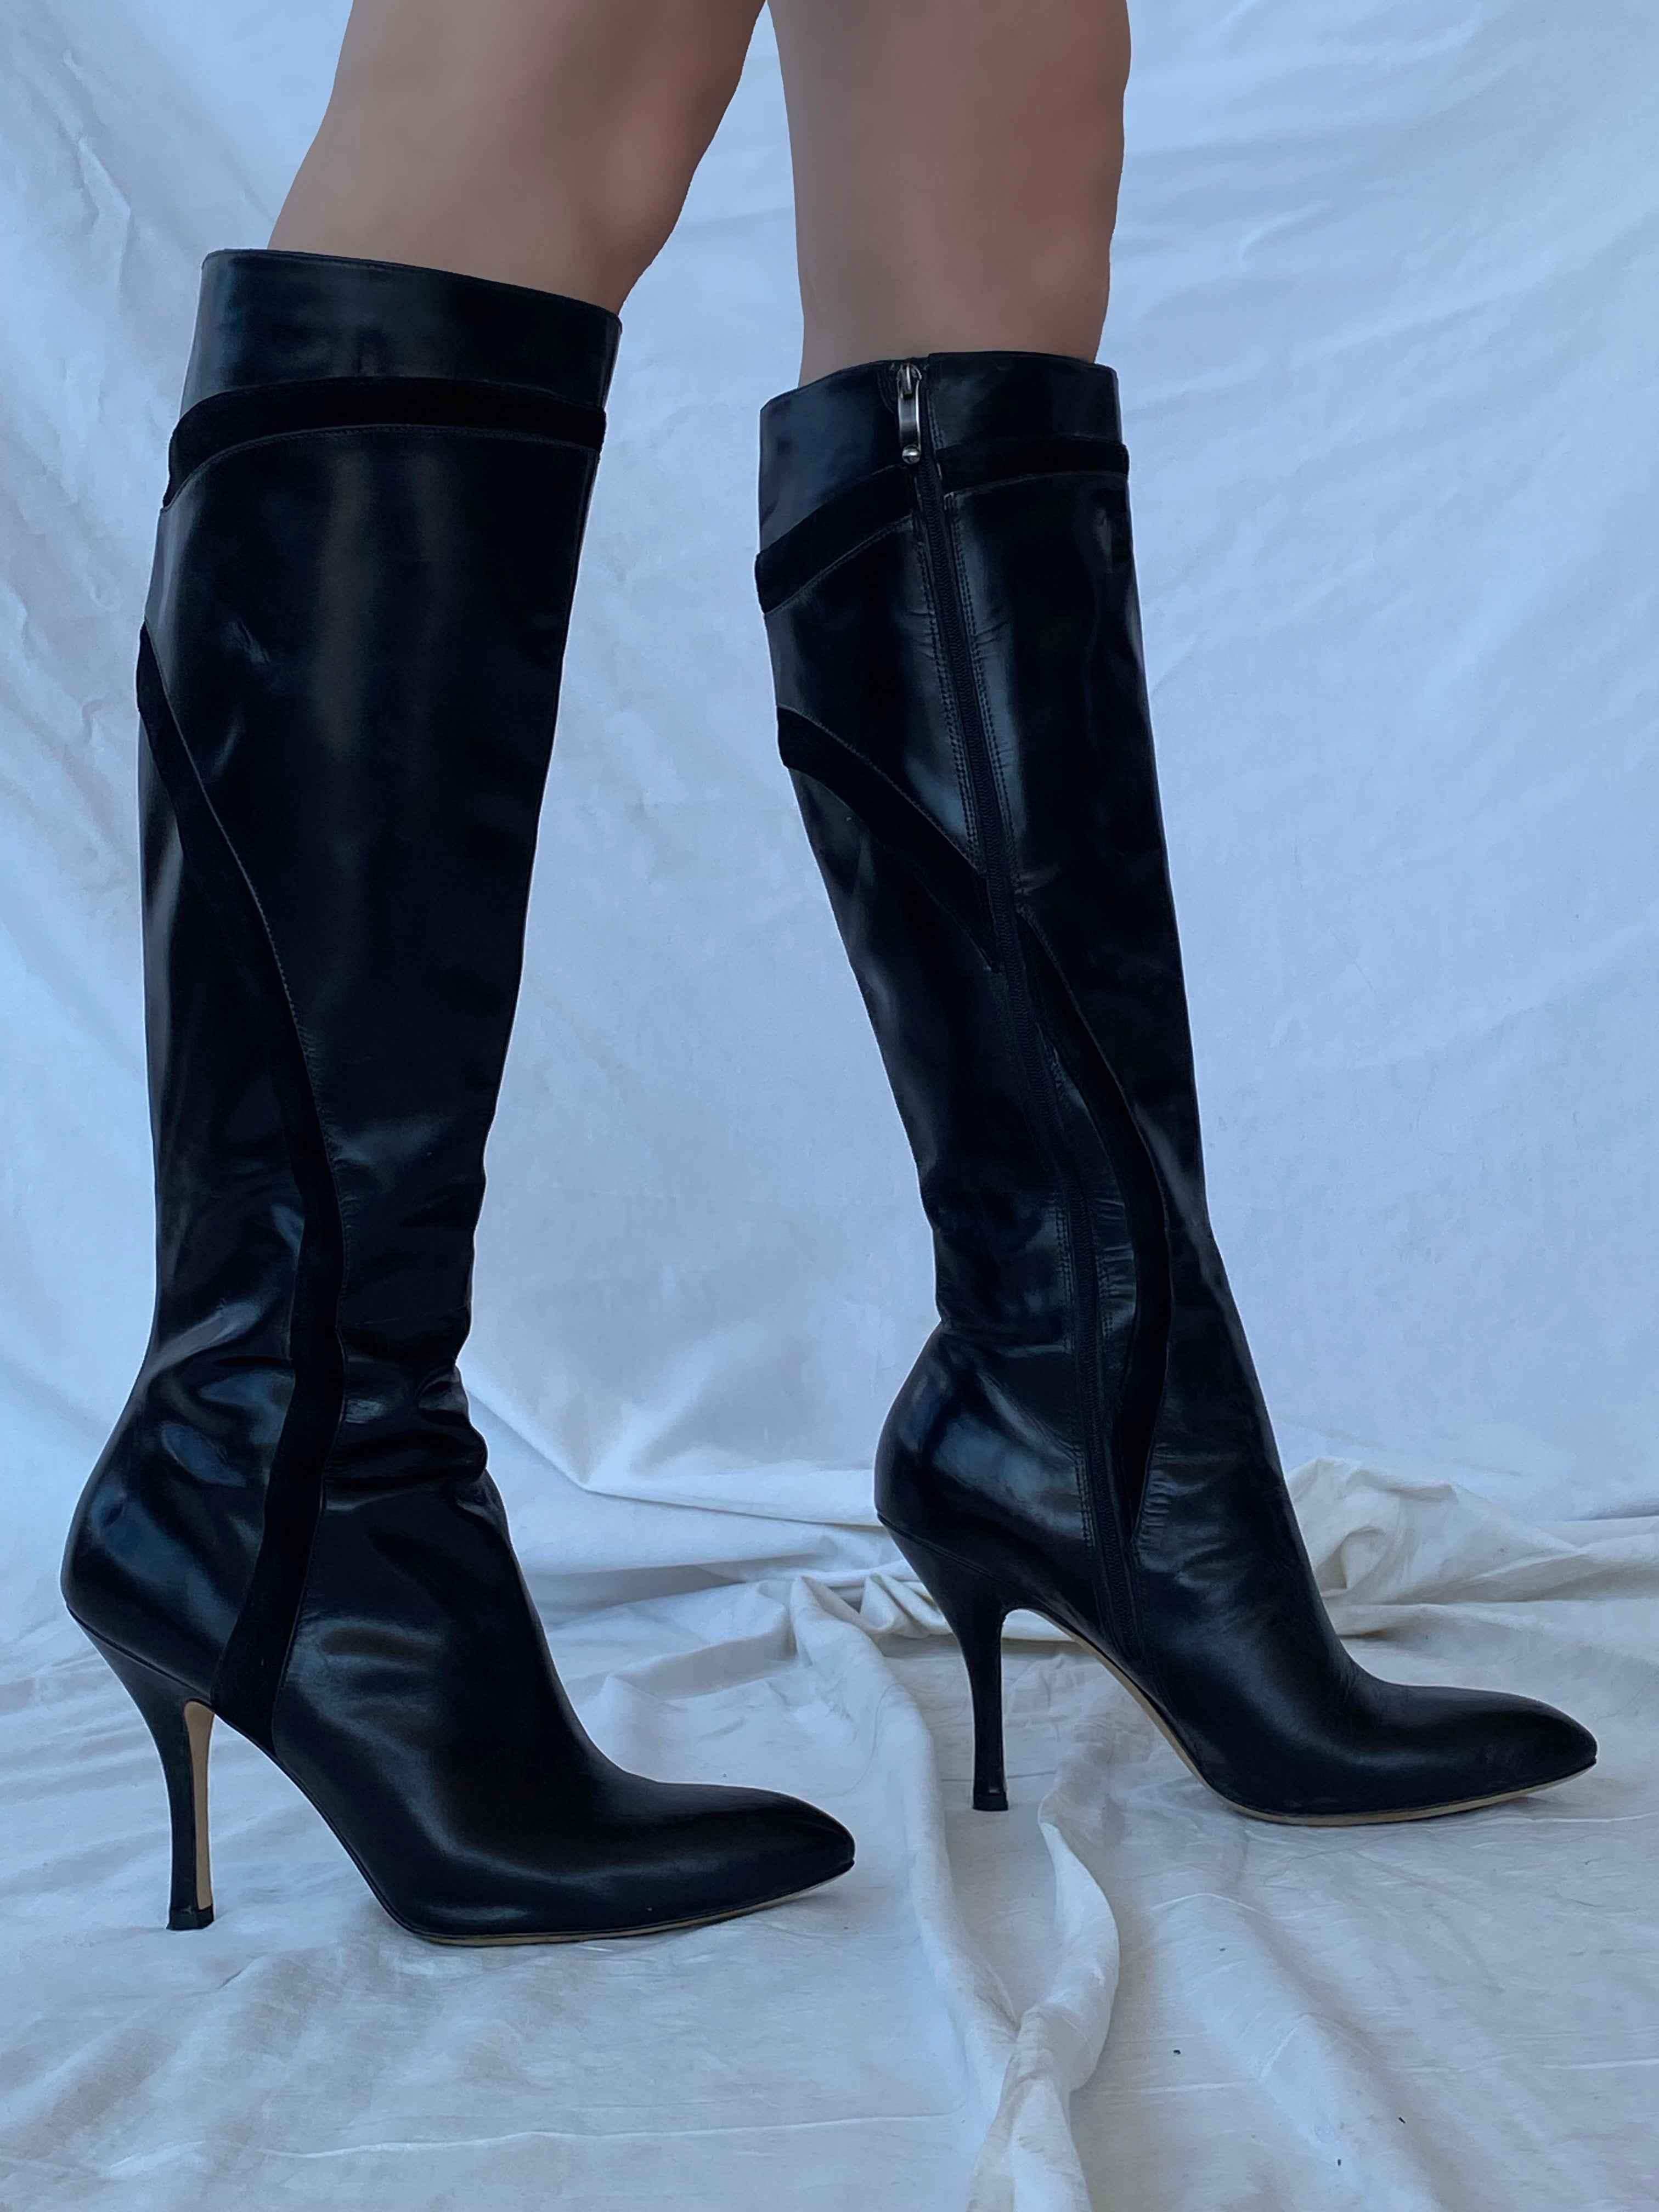 VIA SPIGA Leather Boots - Balagan Vintage Boots 00s, 90s, leather